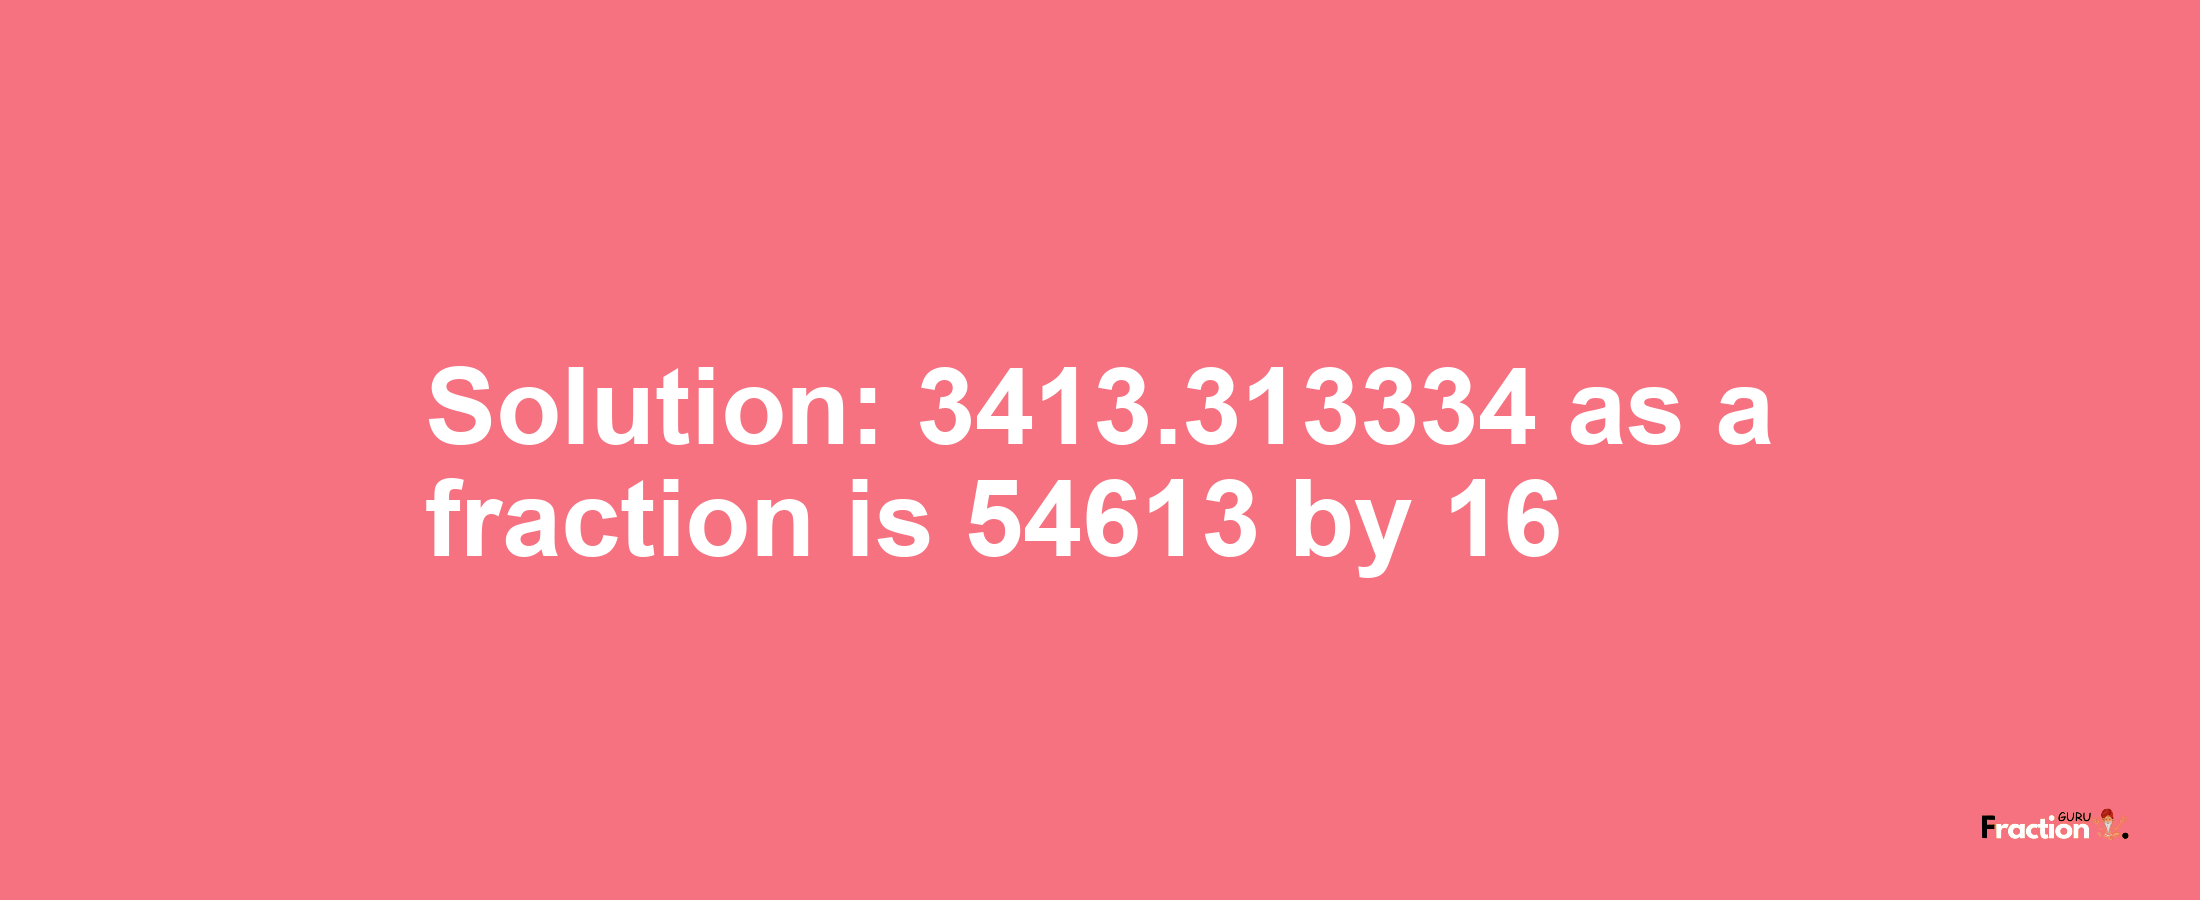 Solution:3413.313334 as a fraction is 54613/16